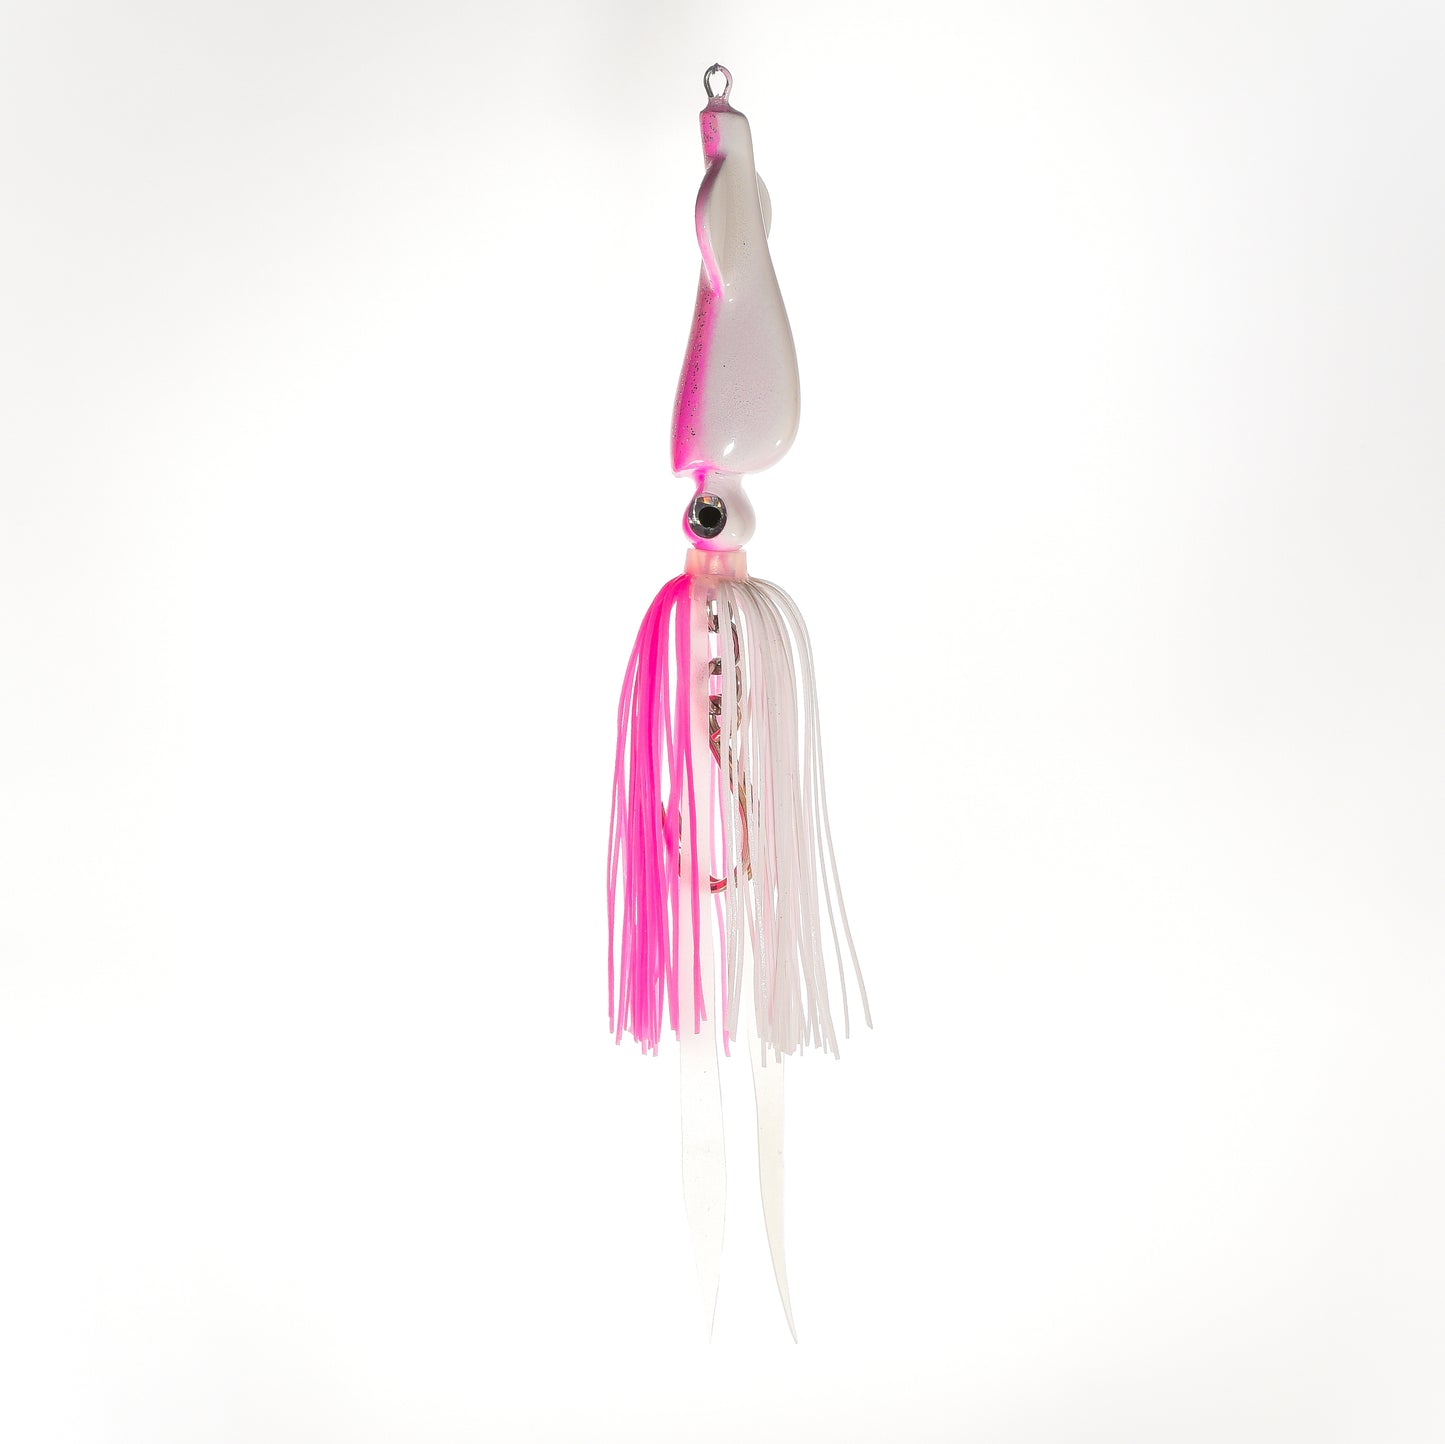 Squid Jig - Electric Pink/White - 3 Oz